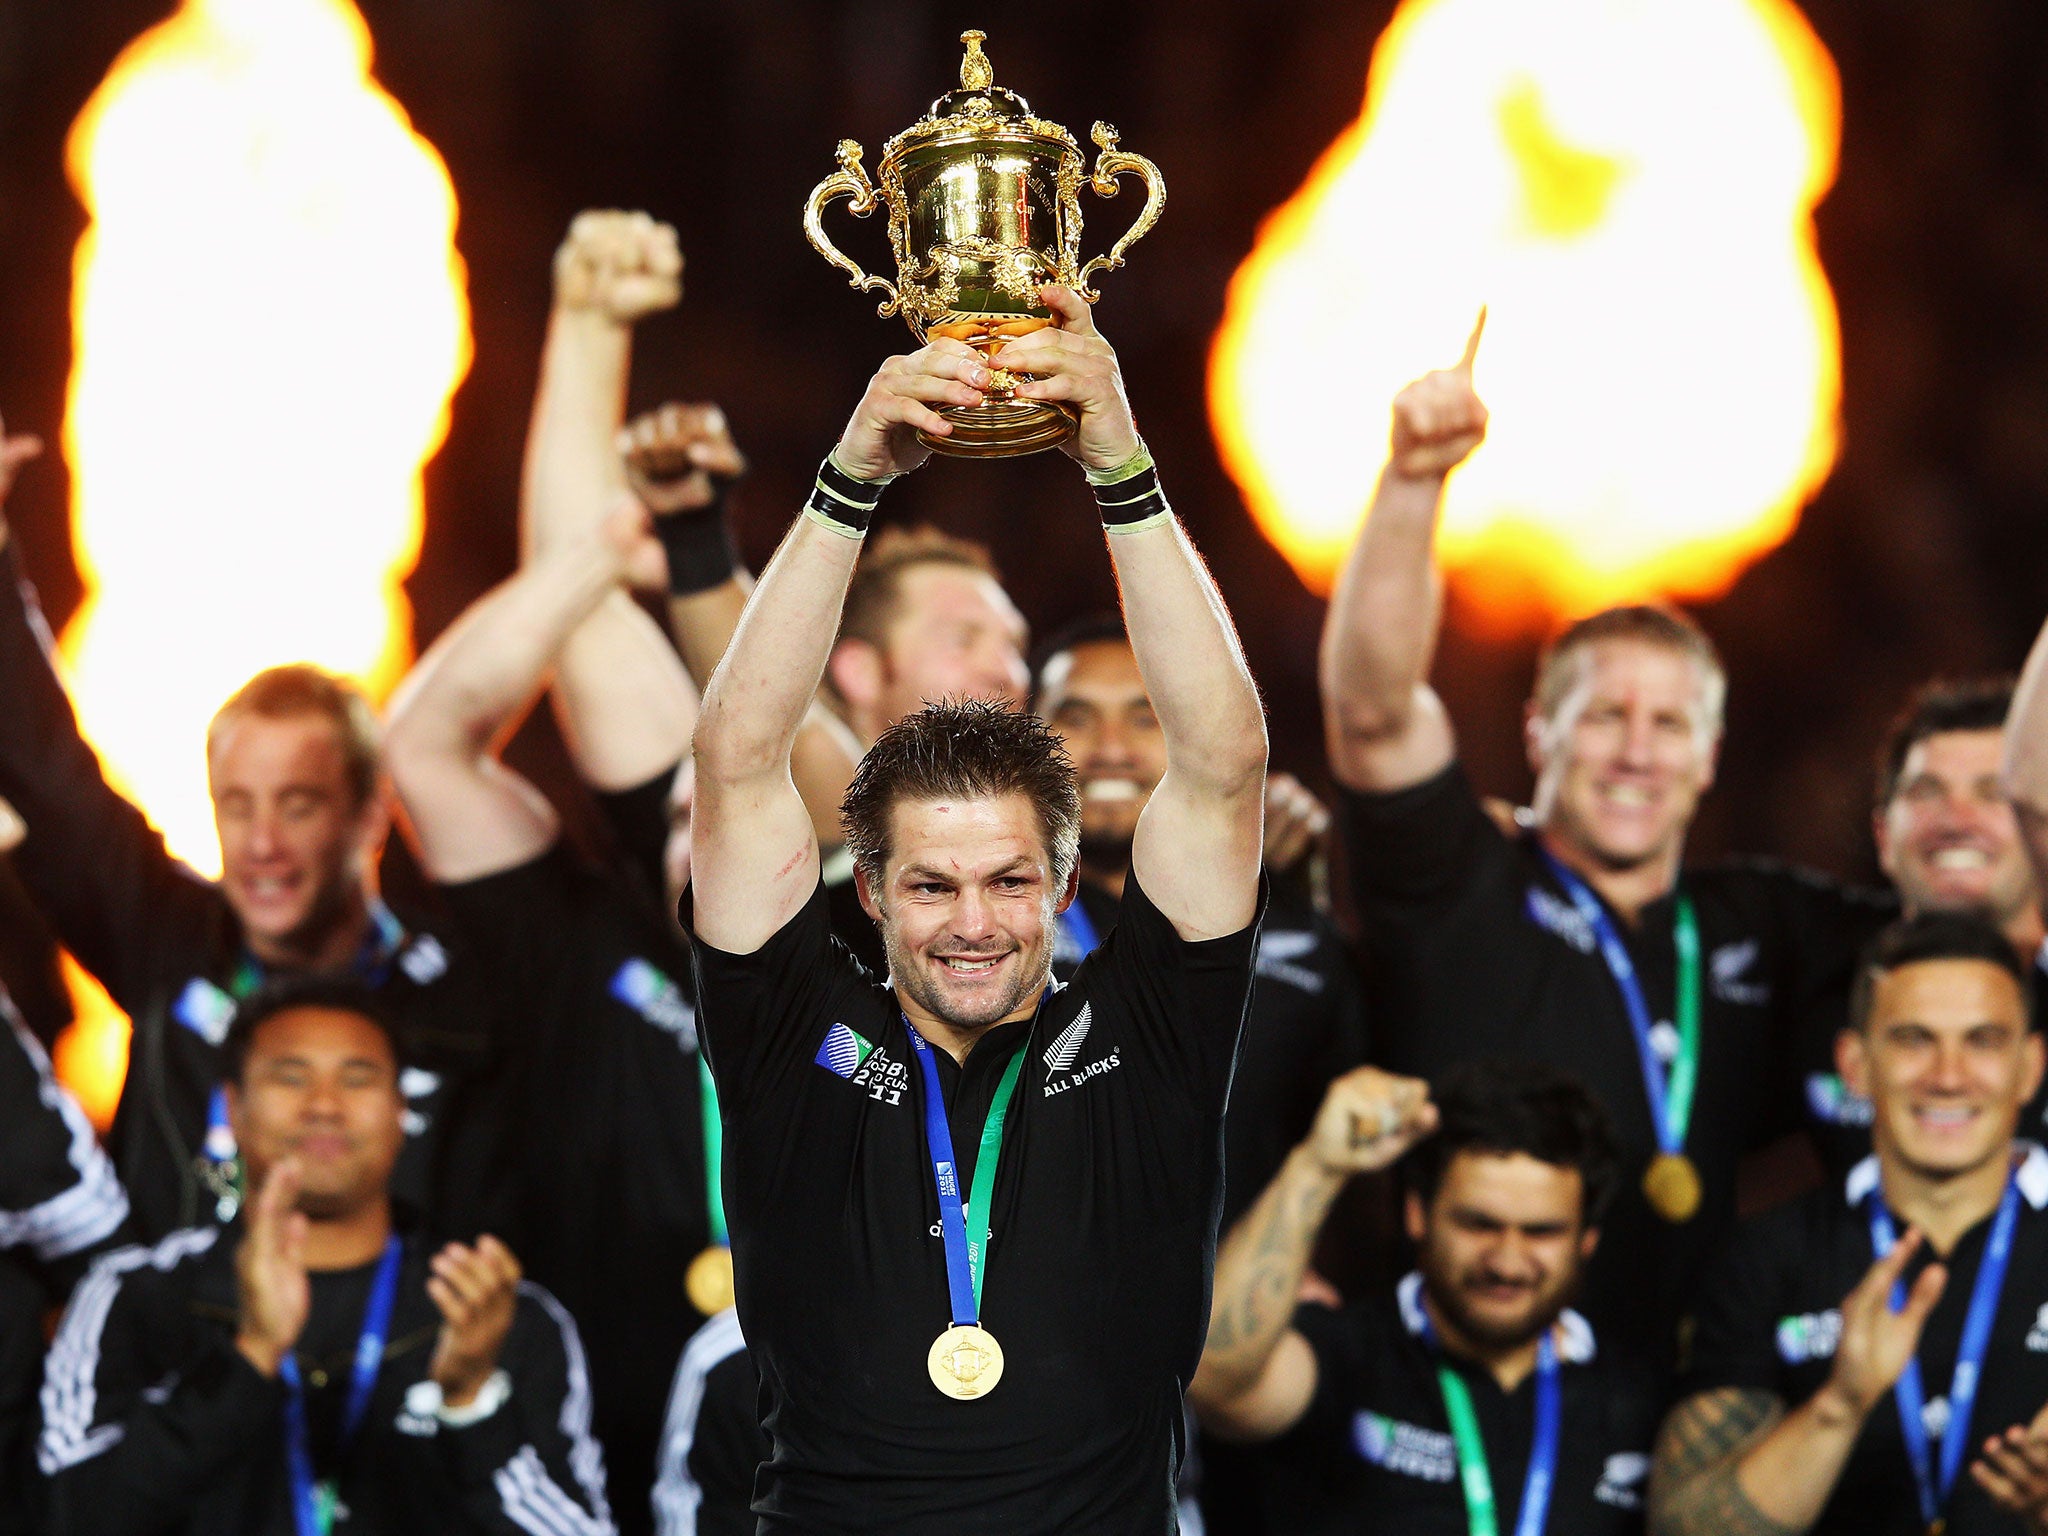 Richie McCaw lifts the World Cup trophy after success in 2011